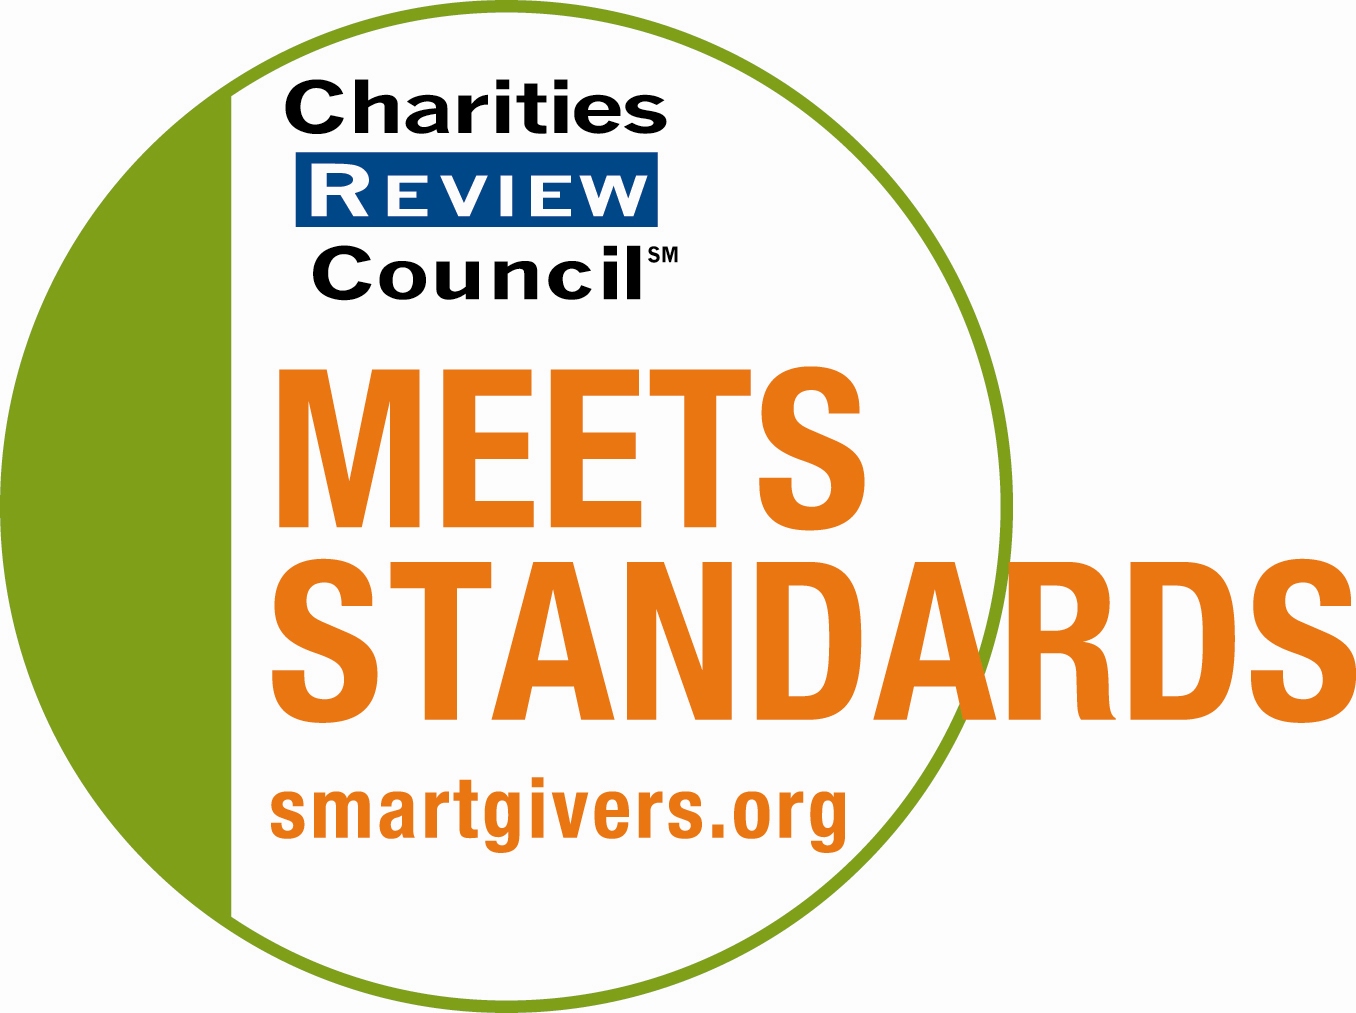 charities-review-council